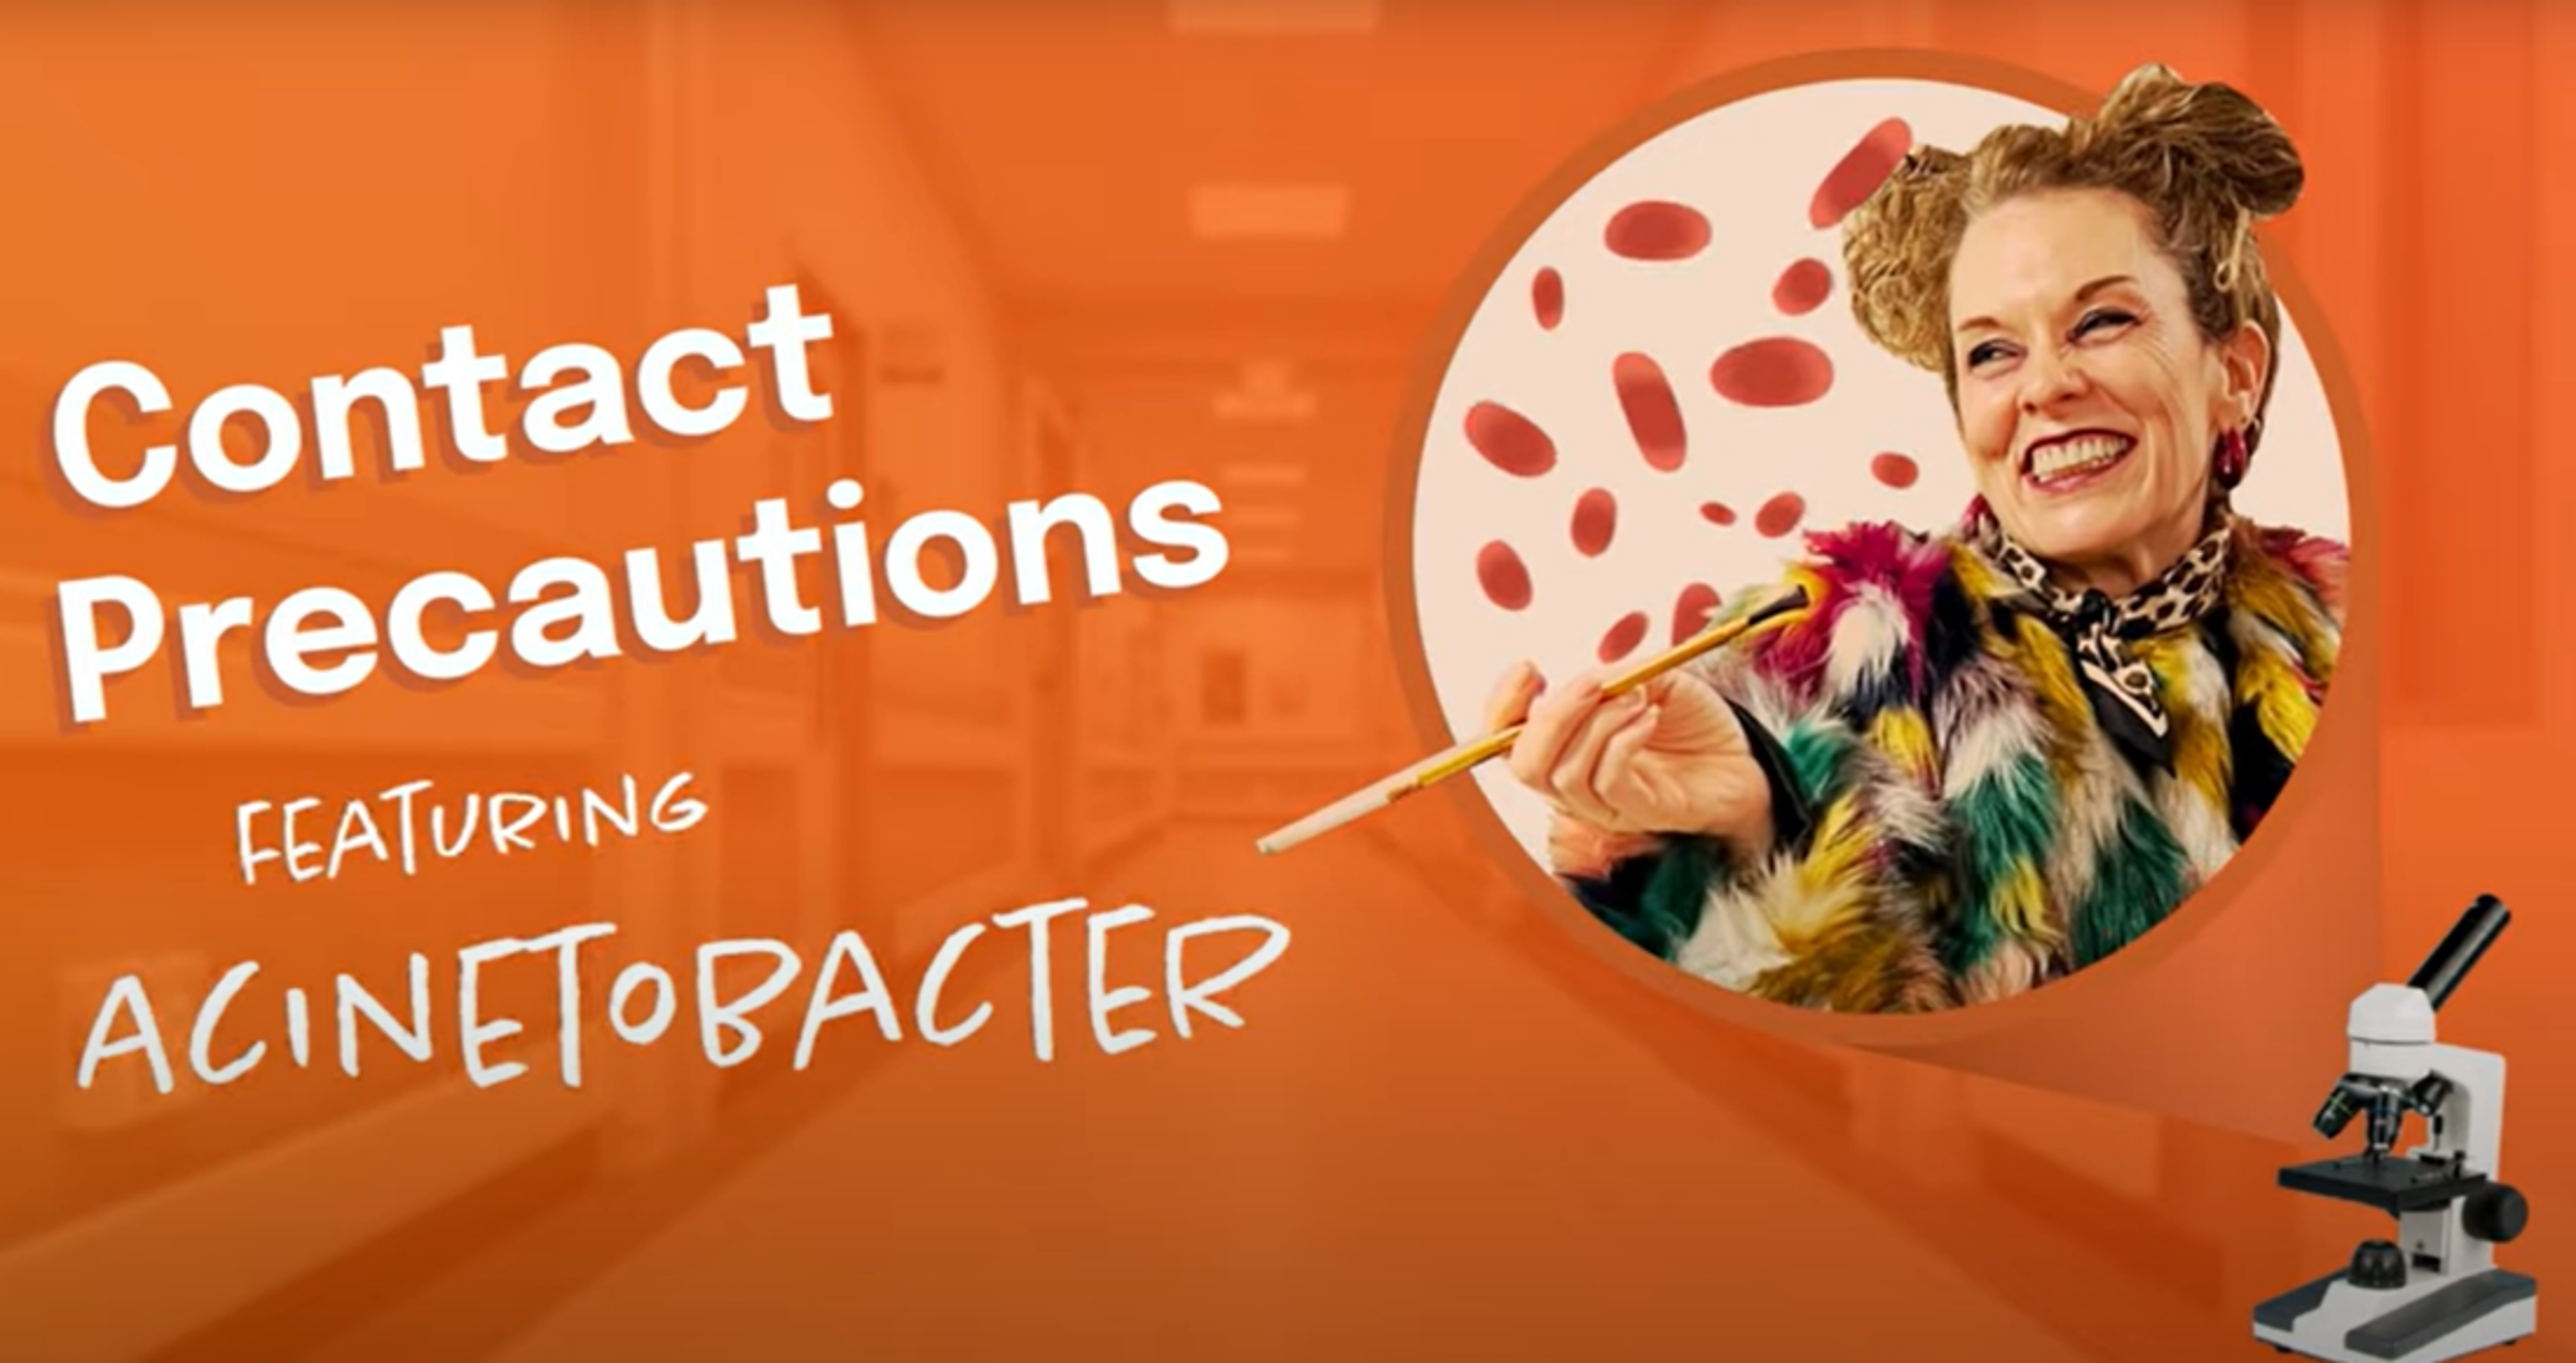 Contact Precautions Featuring Acinetobacter Promotional Image with Smiling Woman and Microscope